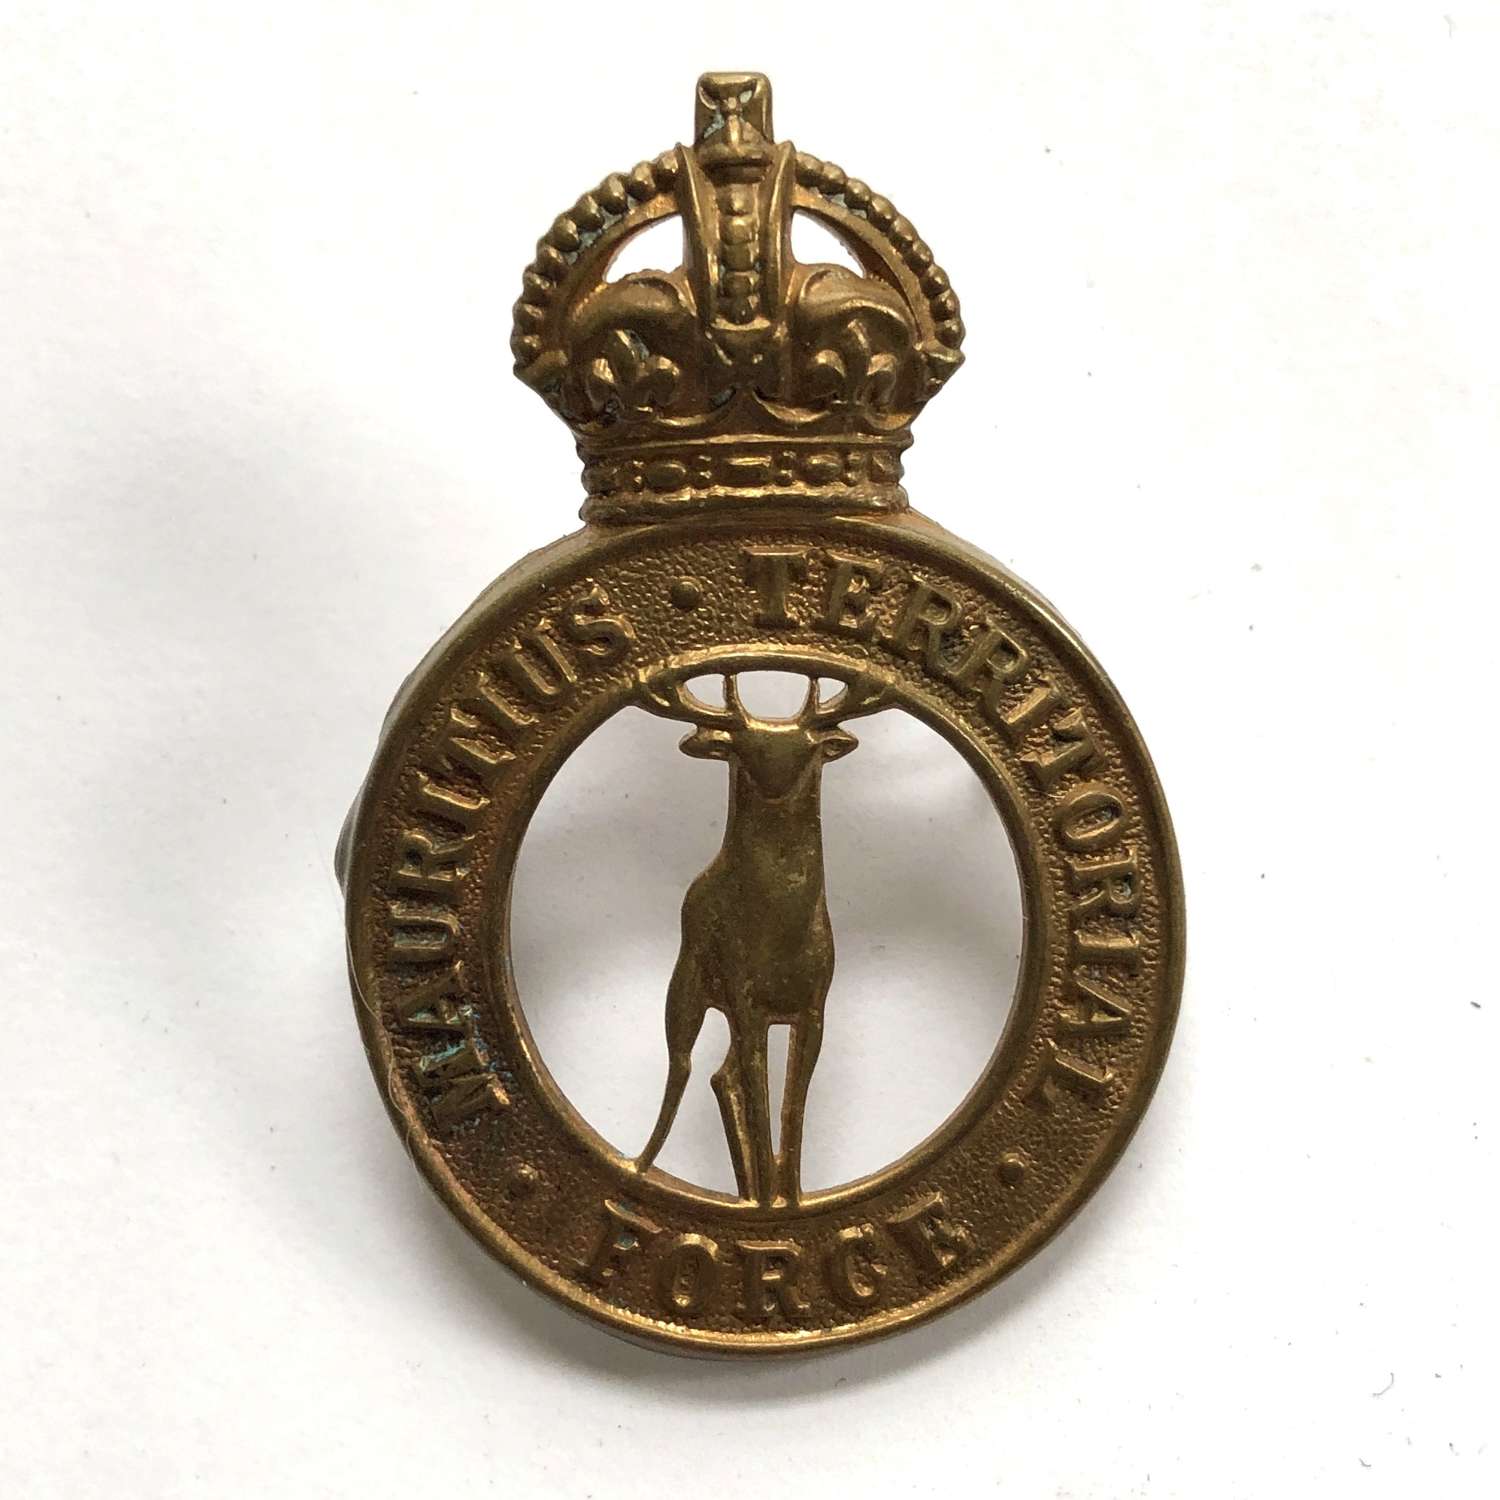 Mauritius Territorial Force brass cap badge by Firmin, London